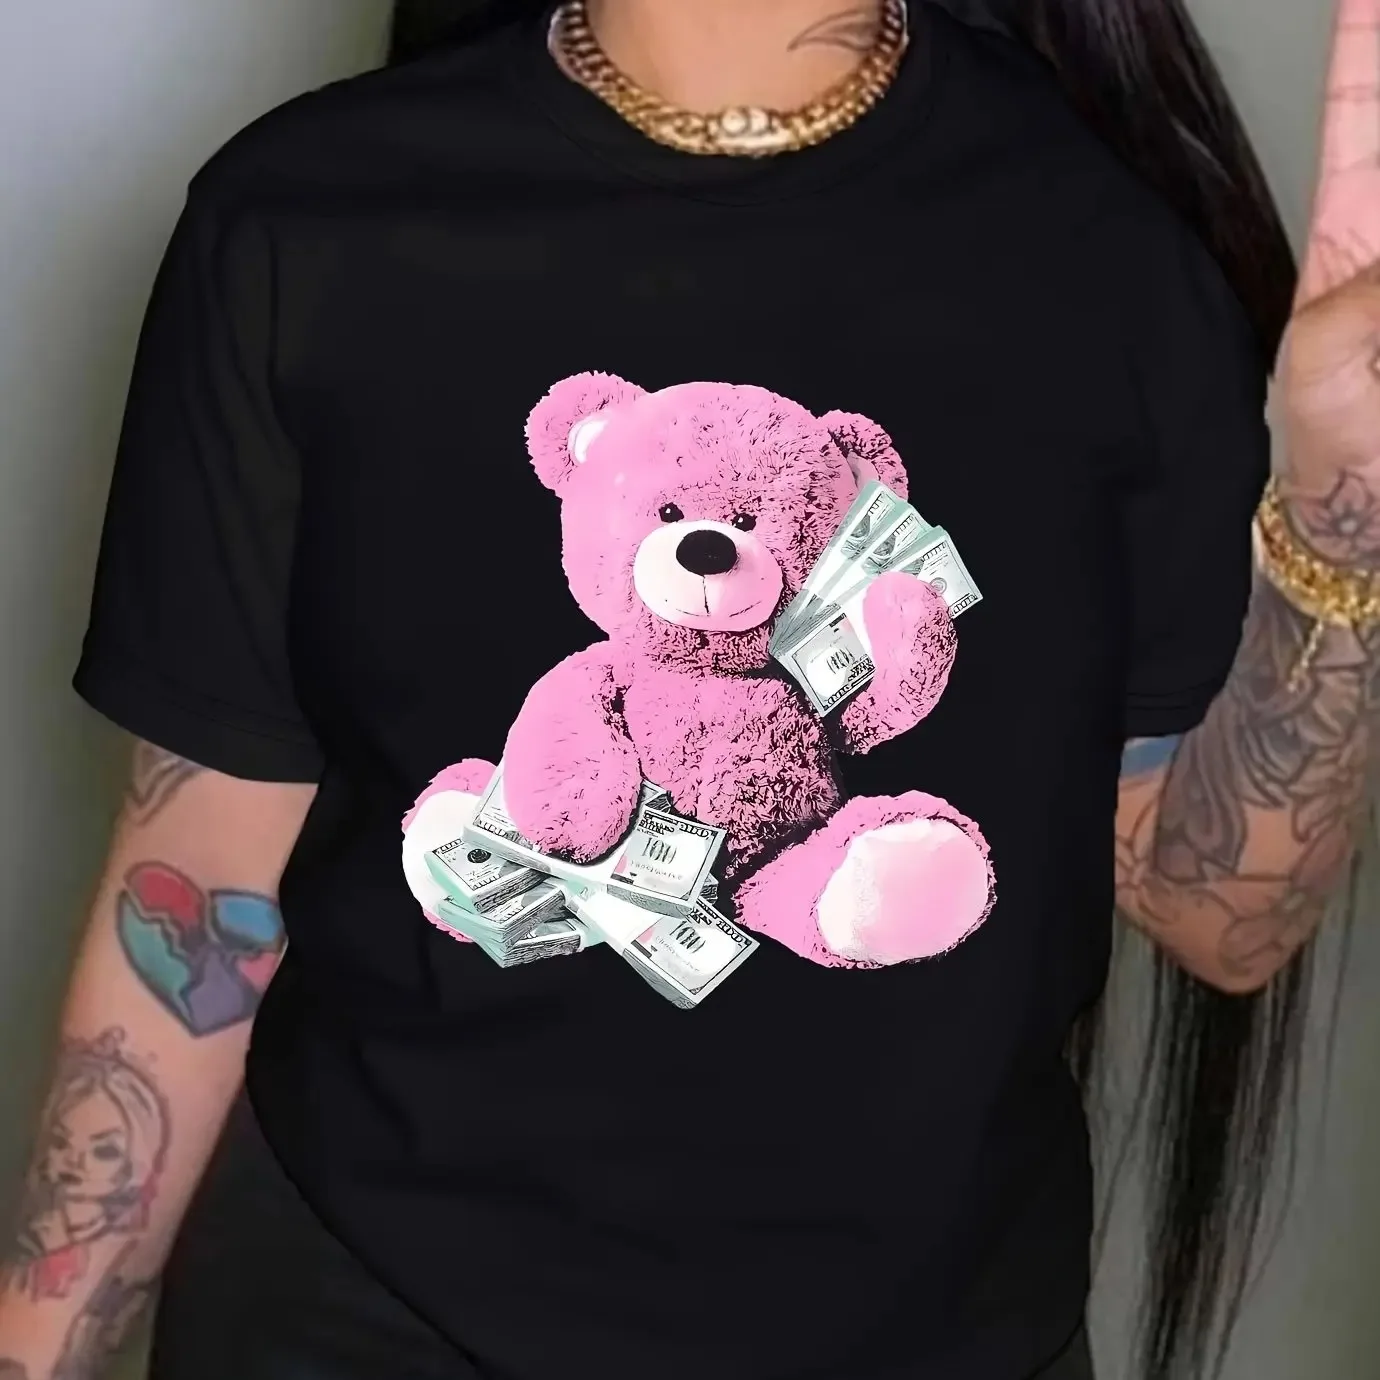 Bear Print Crew Neck T-Shirt, Casual Short Sleeve Top for Spring & Summer, Women's Clothing